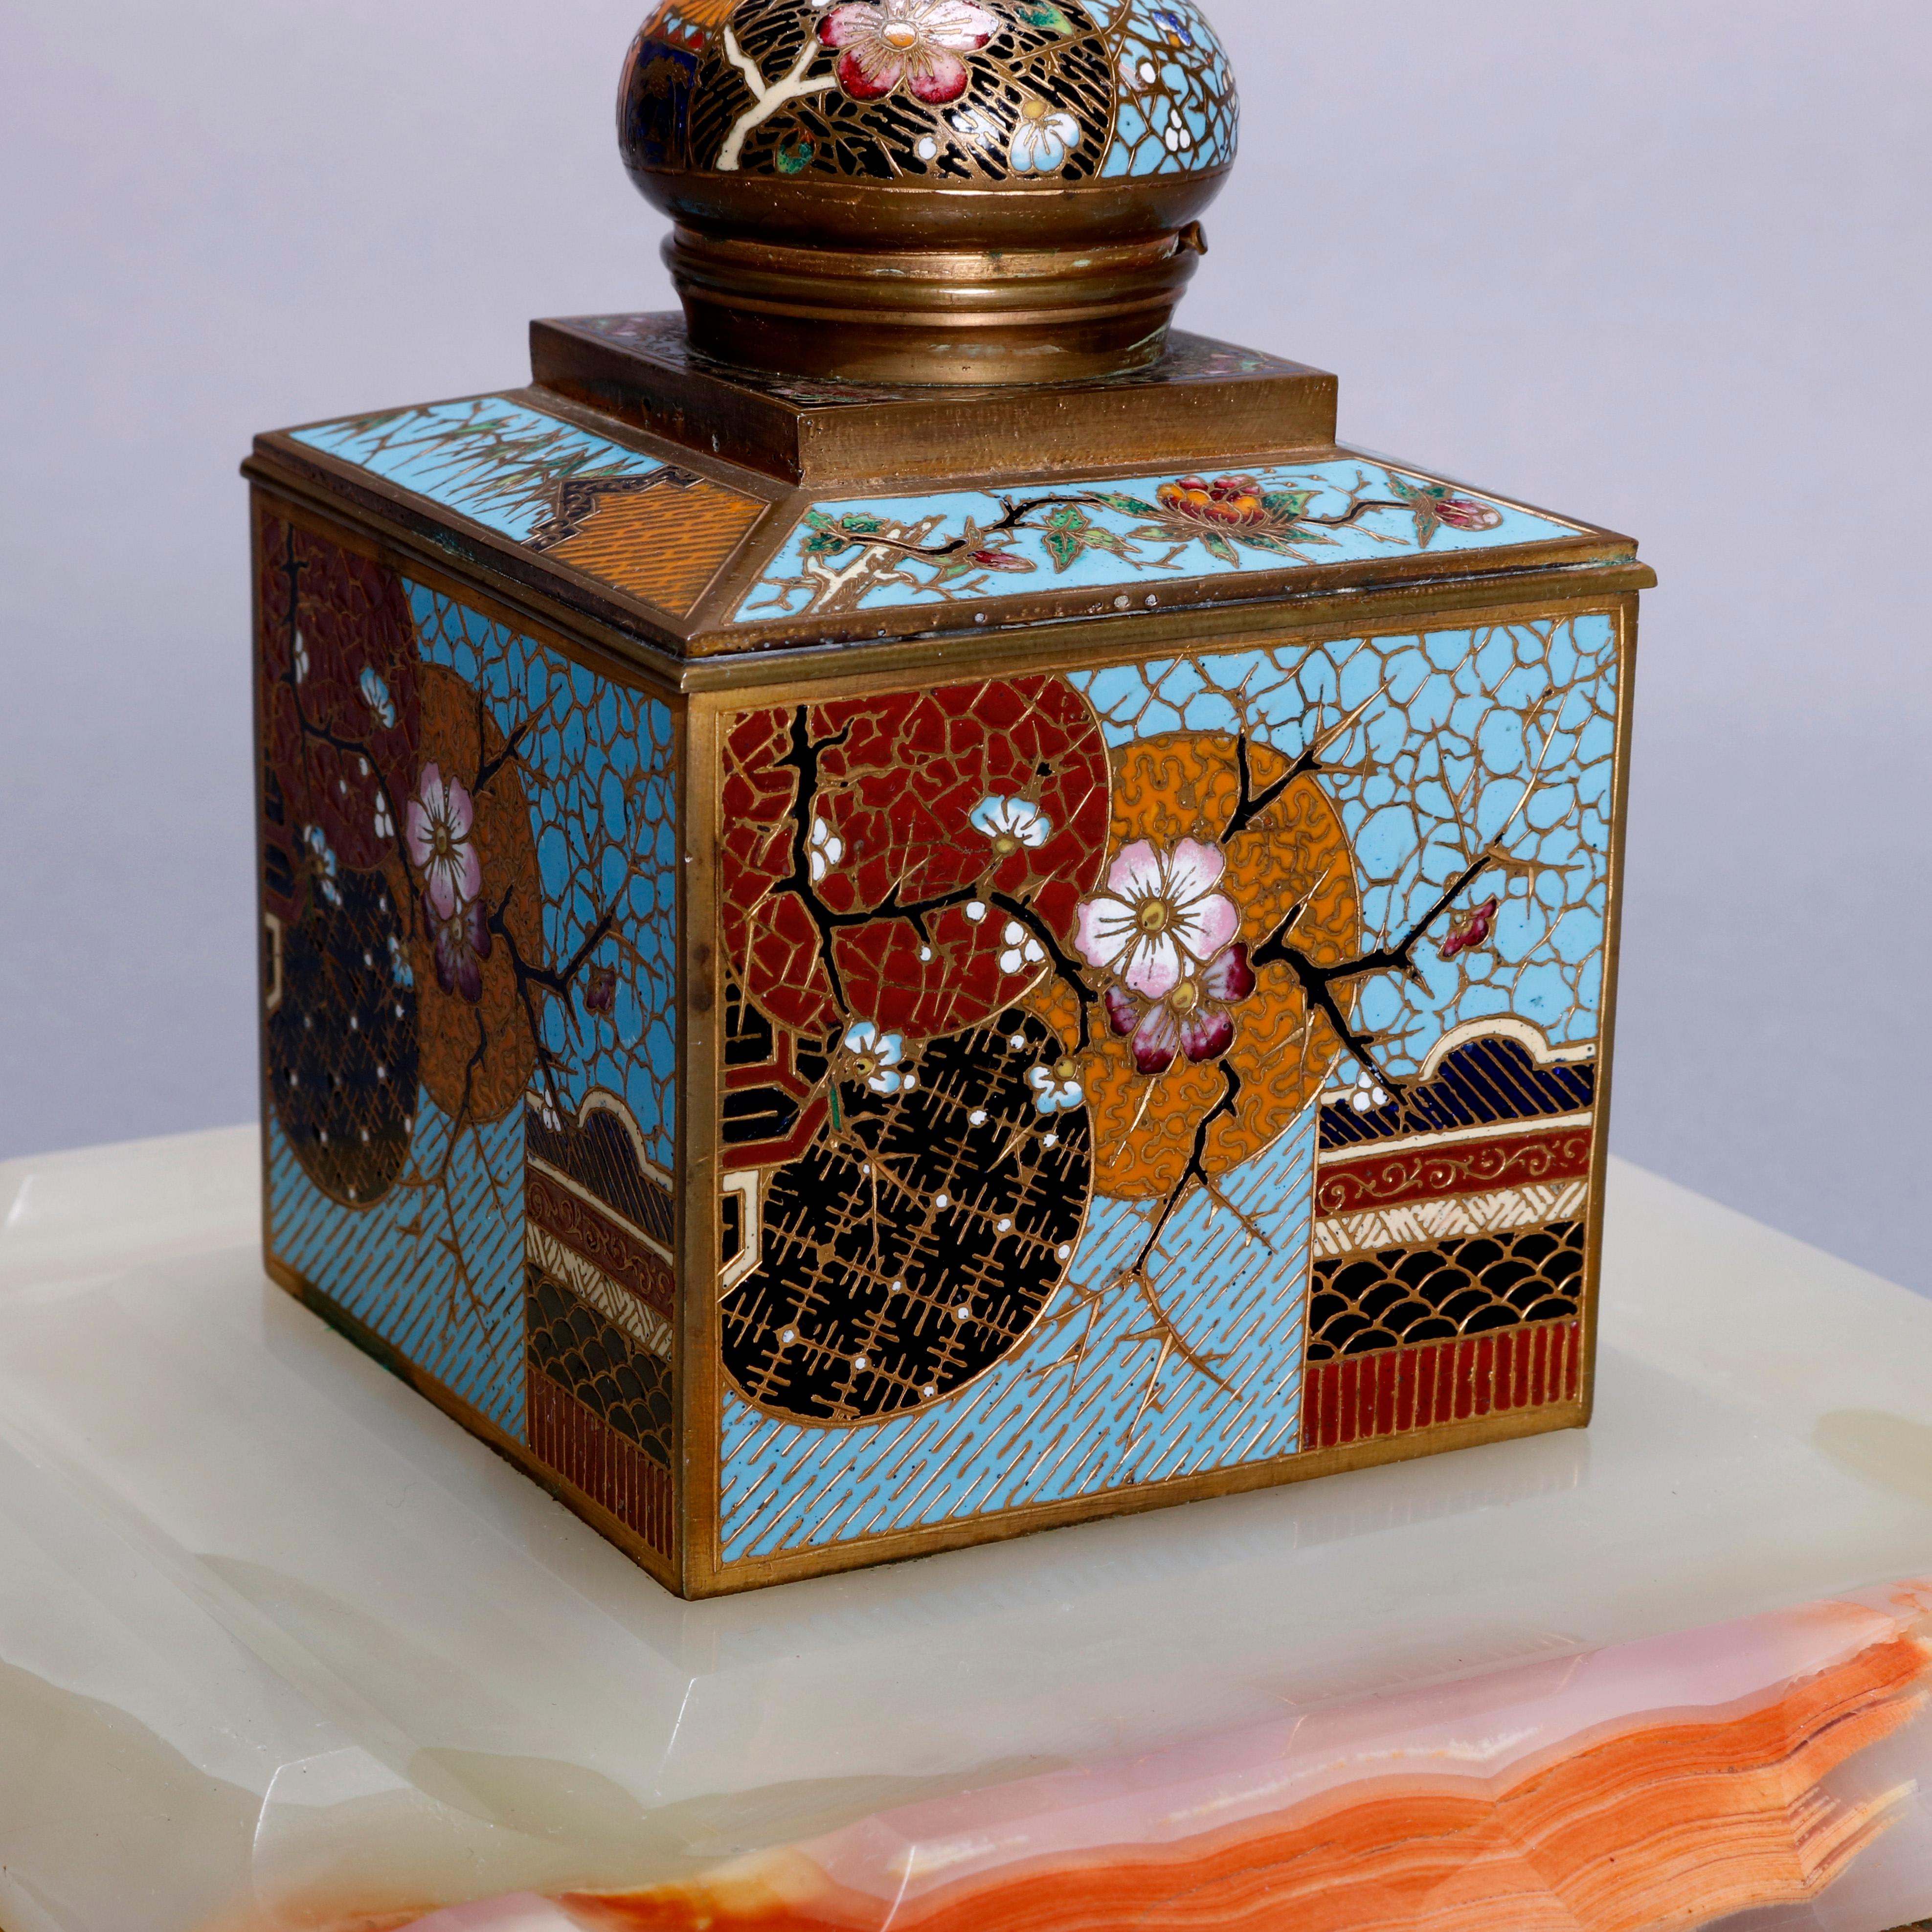 An antique Chinese Aesthetic Movement inkwell offers cube form with spherical hinged lid having Cloisonne enameled geometric and floral decoration, seated on beveled onyx base, circa 1870

***DELIVERY NOTICE – Due to COVID-19 we are employing